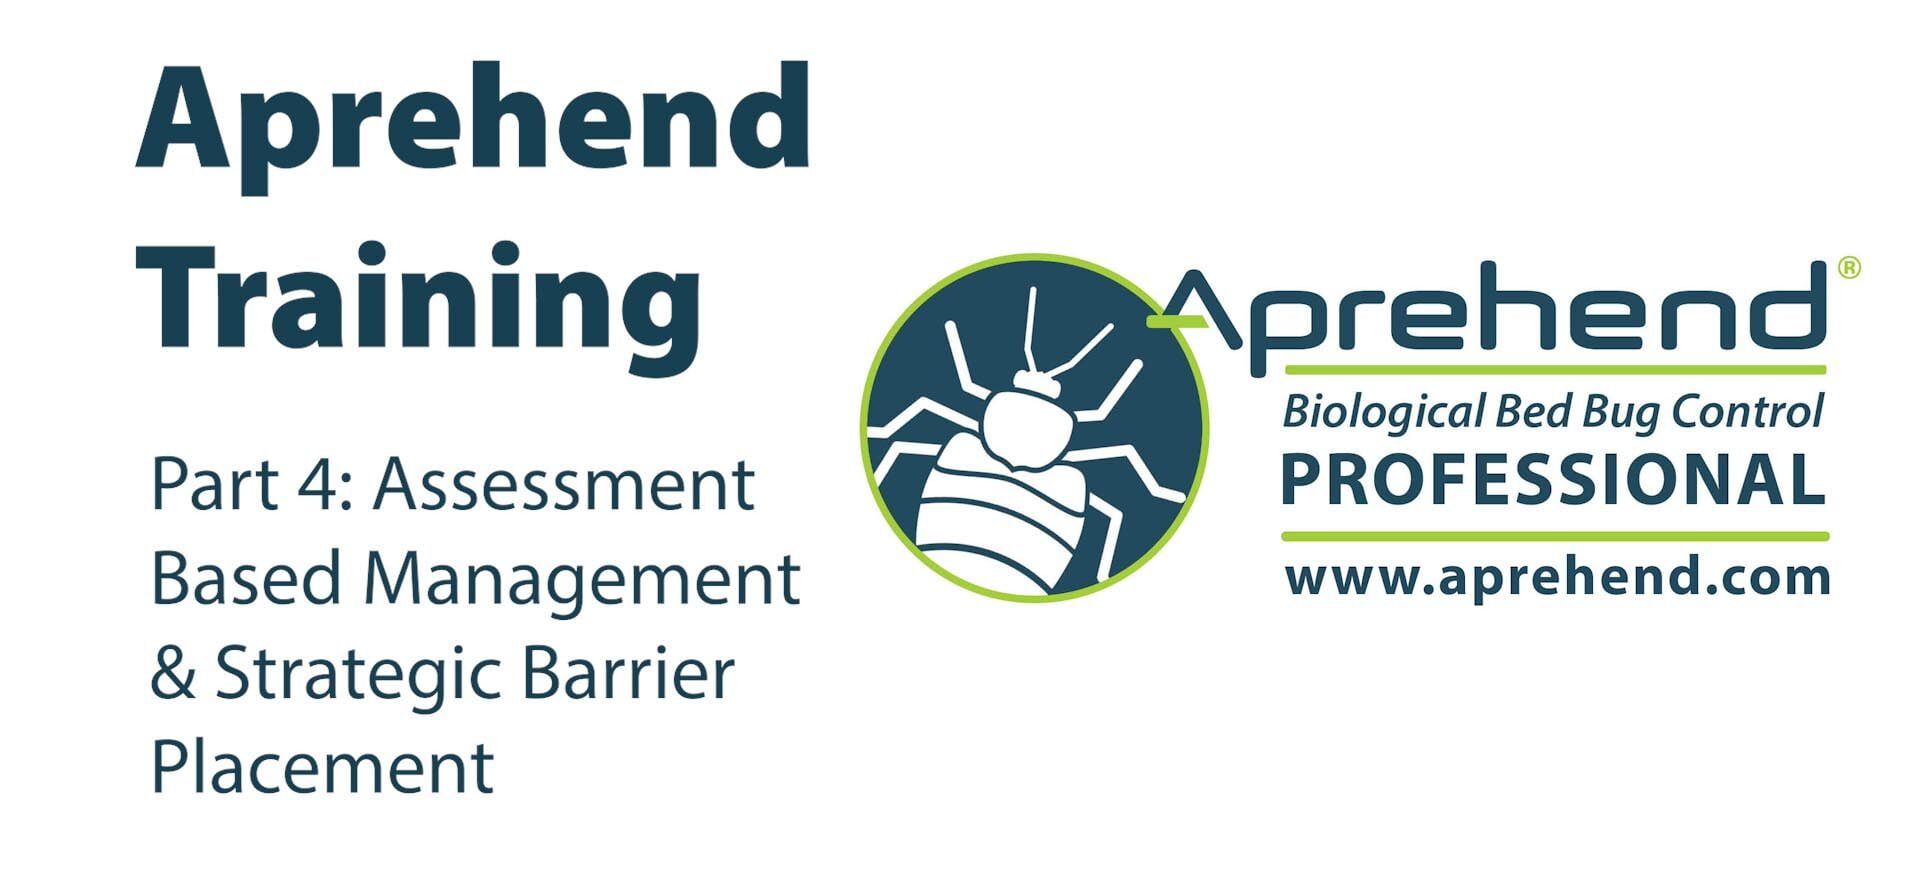 Aprehend Training, Part 4: Assessment Based Management and Strategic Barrier Placement